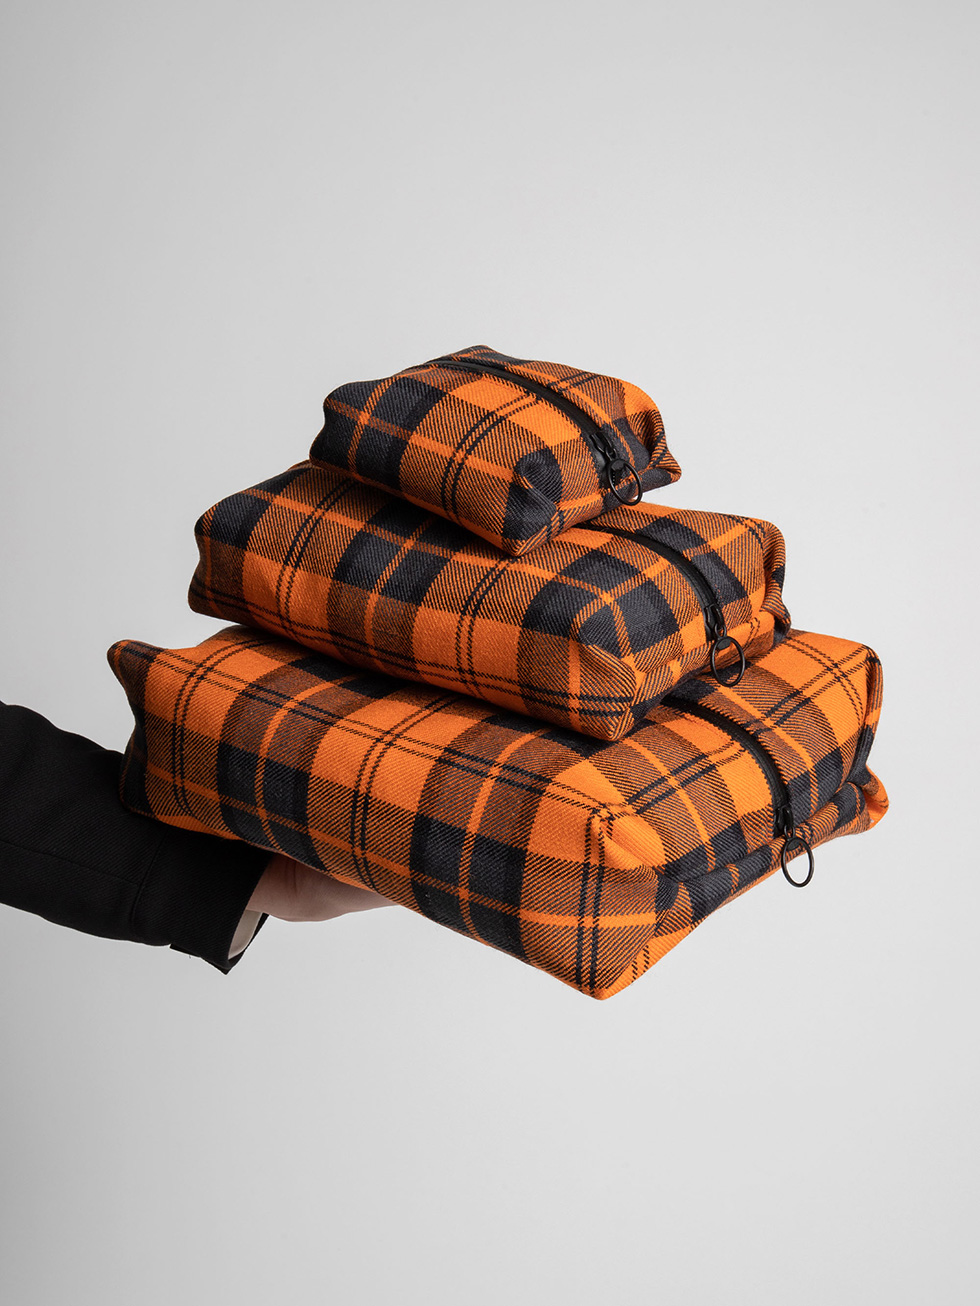 Trakke x Carryology Muir Project Foulden Packing Cubes